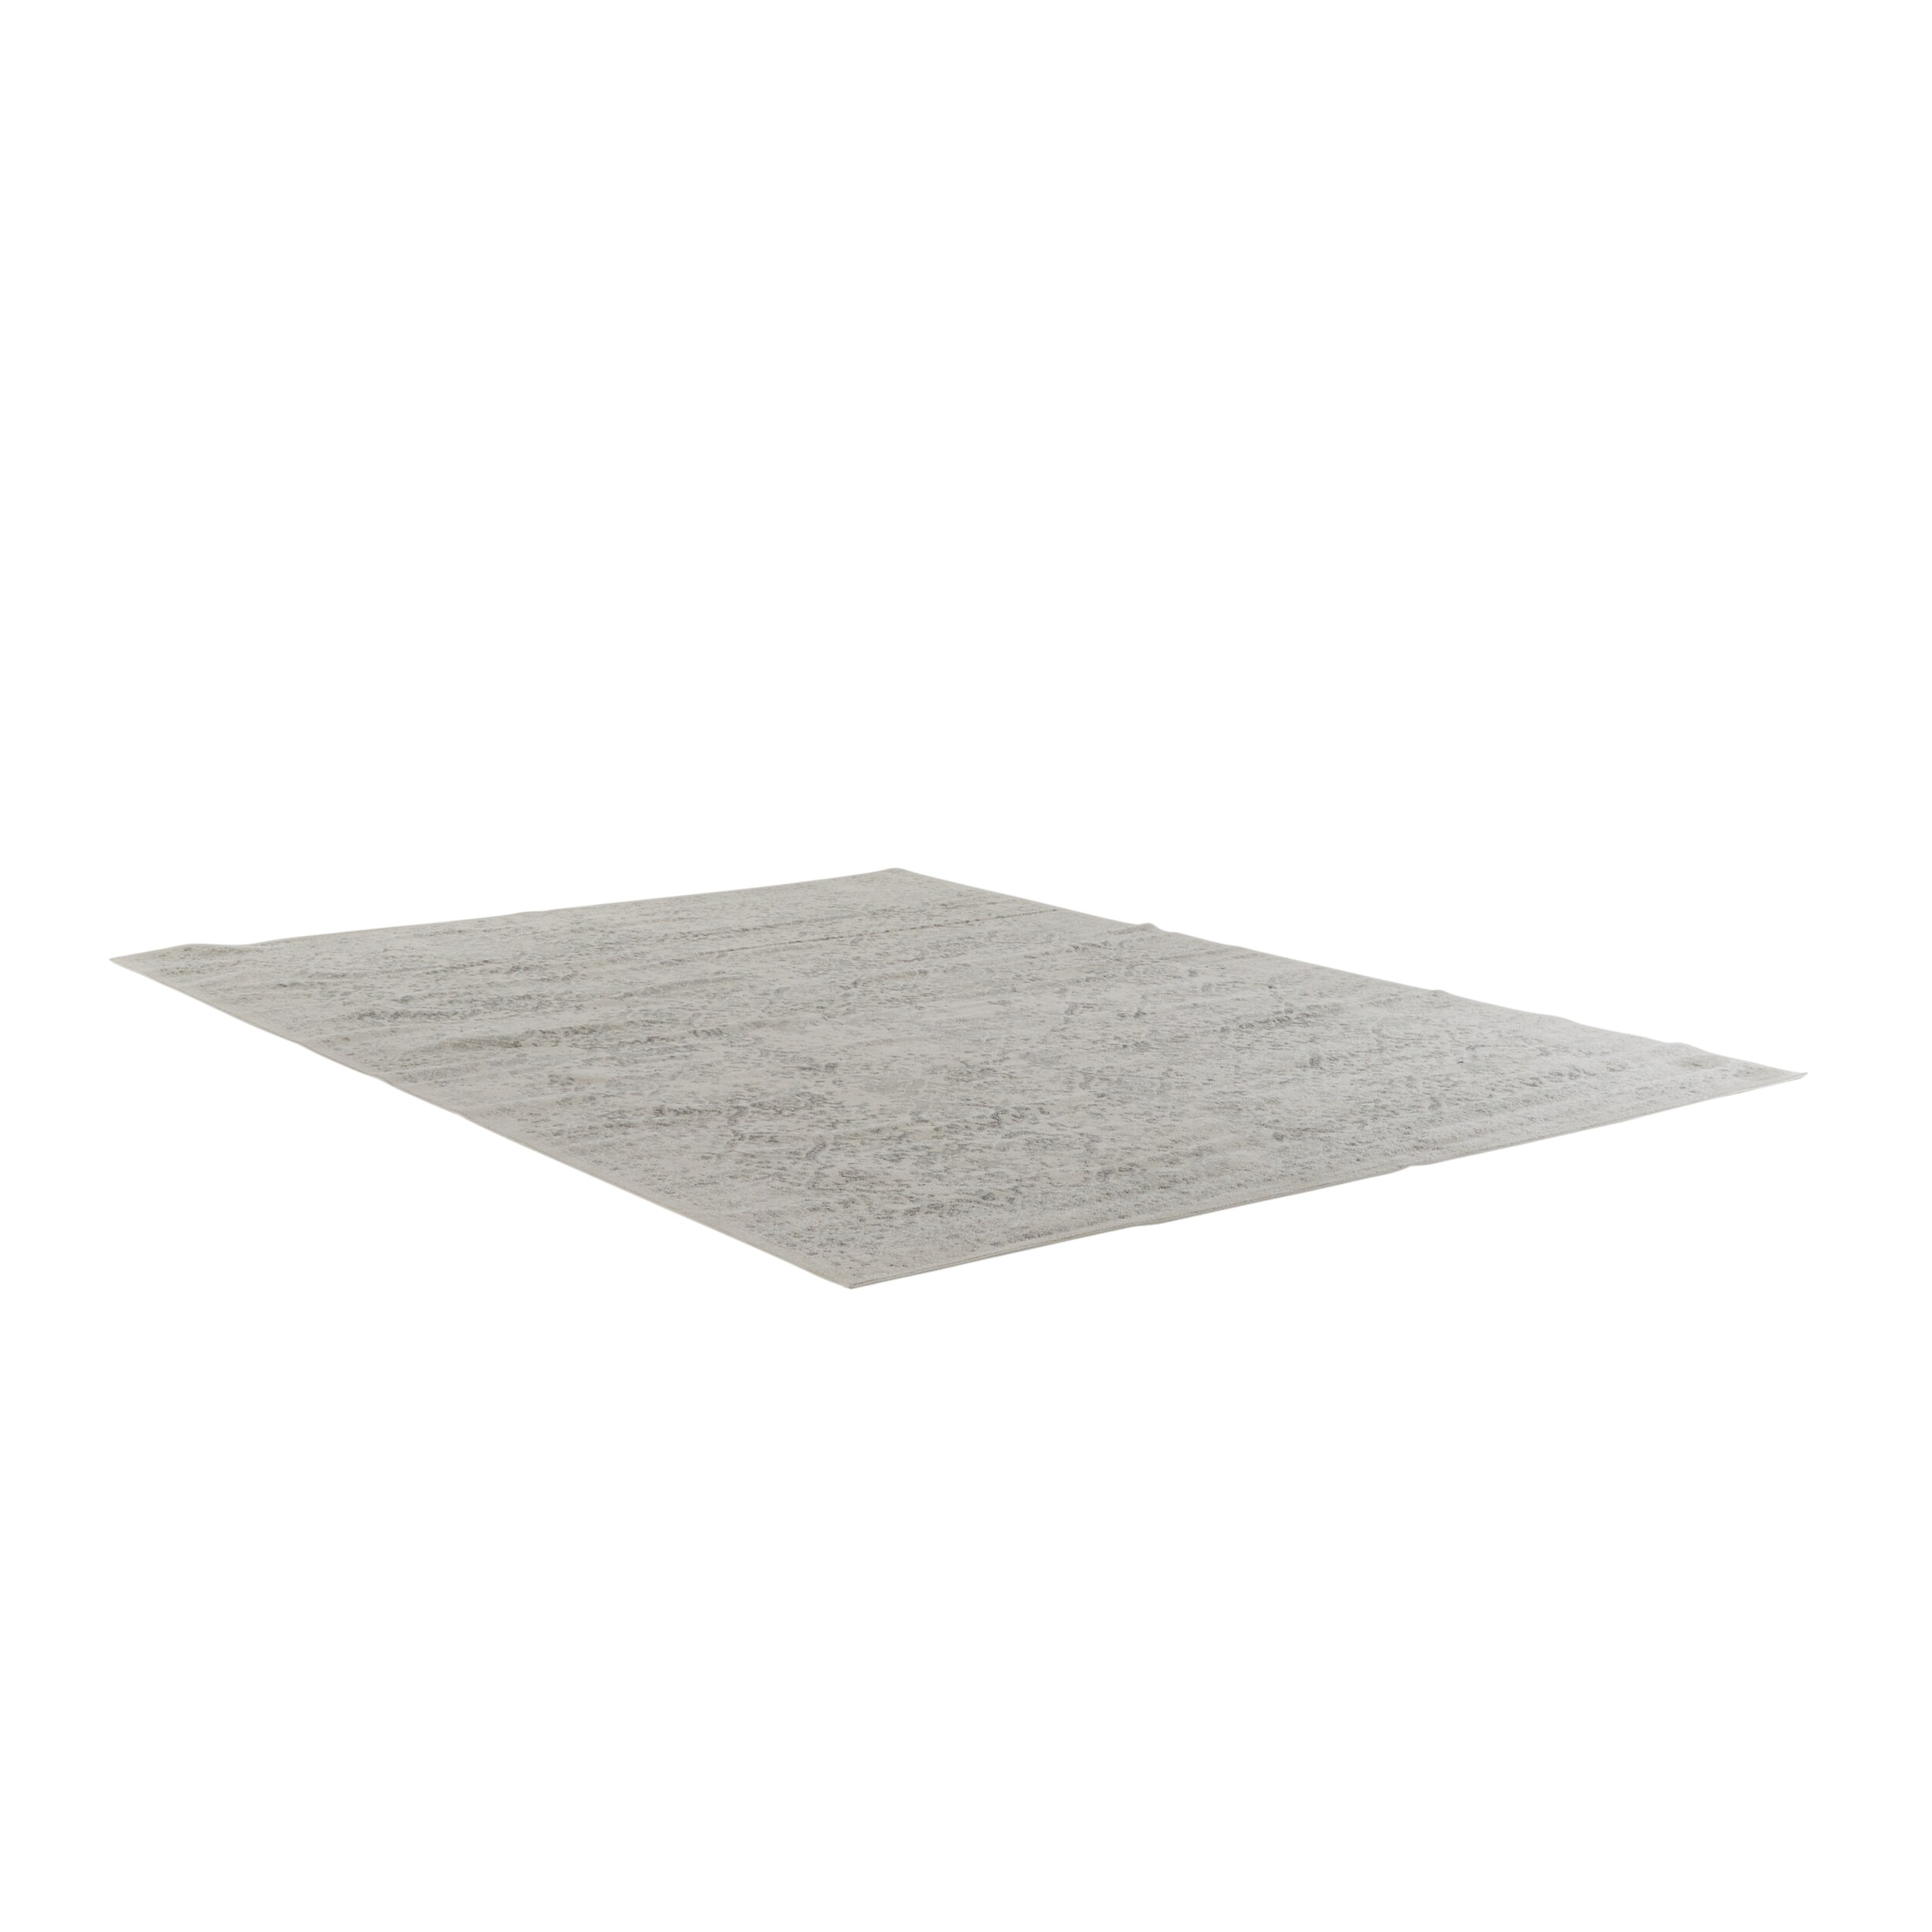 nuLOOM Marleen 10 x 13 White Indoor Solid Area Rug in the Rugs